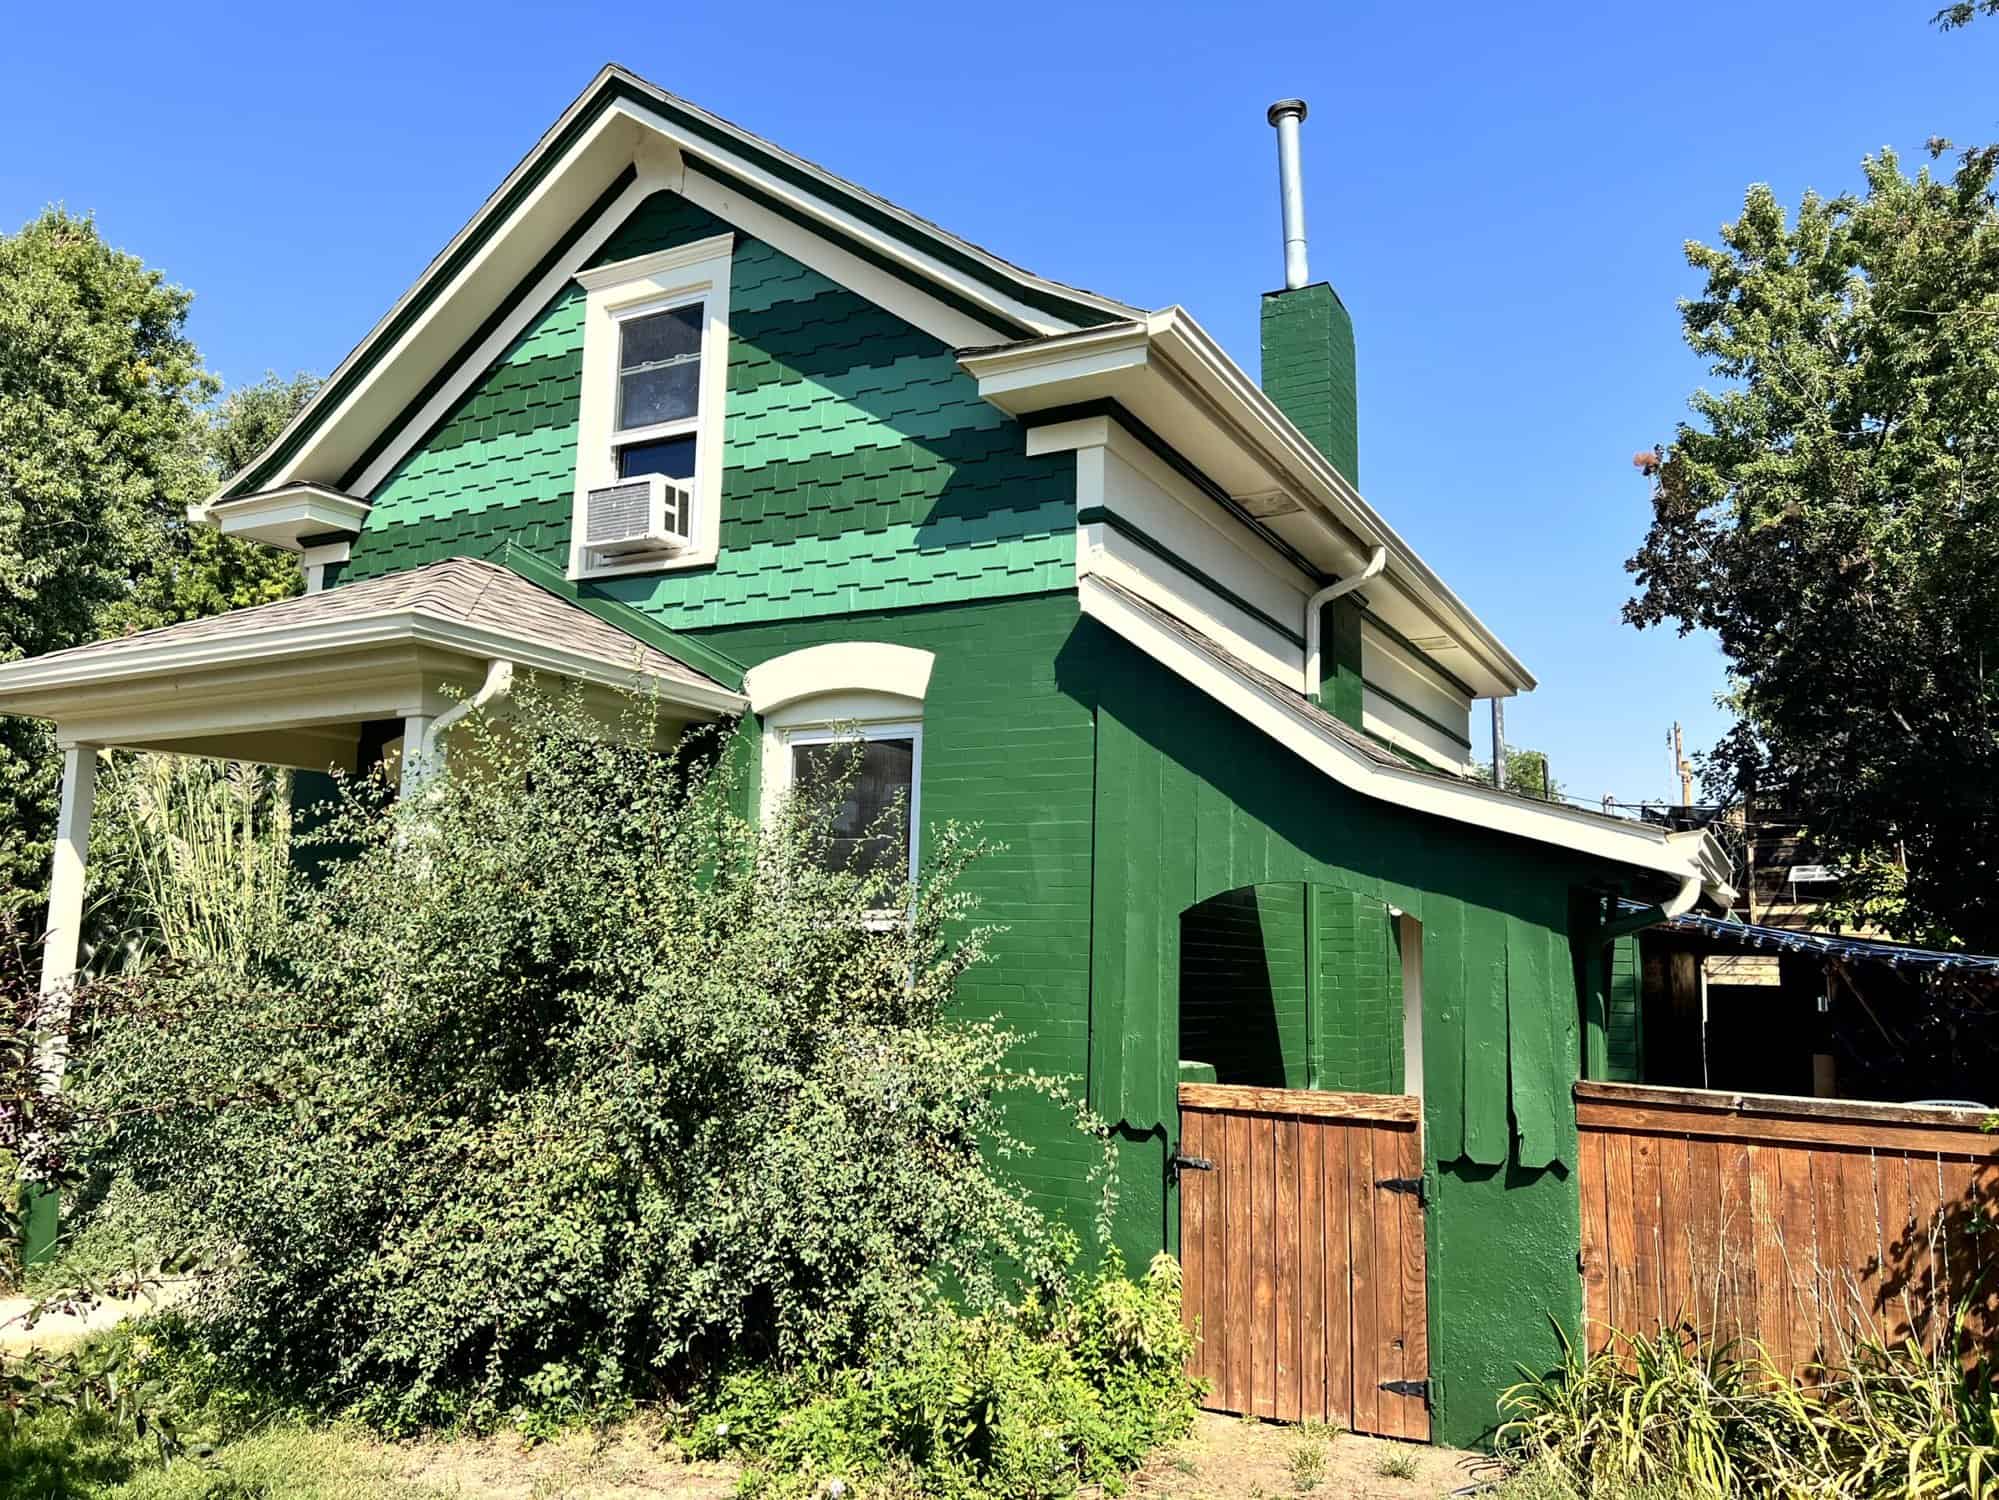 Green Painted House Exterior with Trees surrounding it- painting services in Longmont, CO